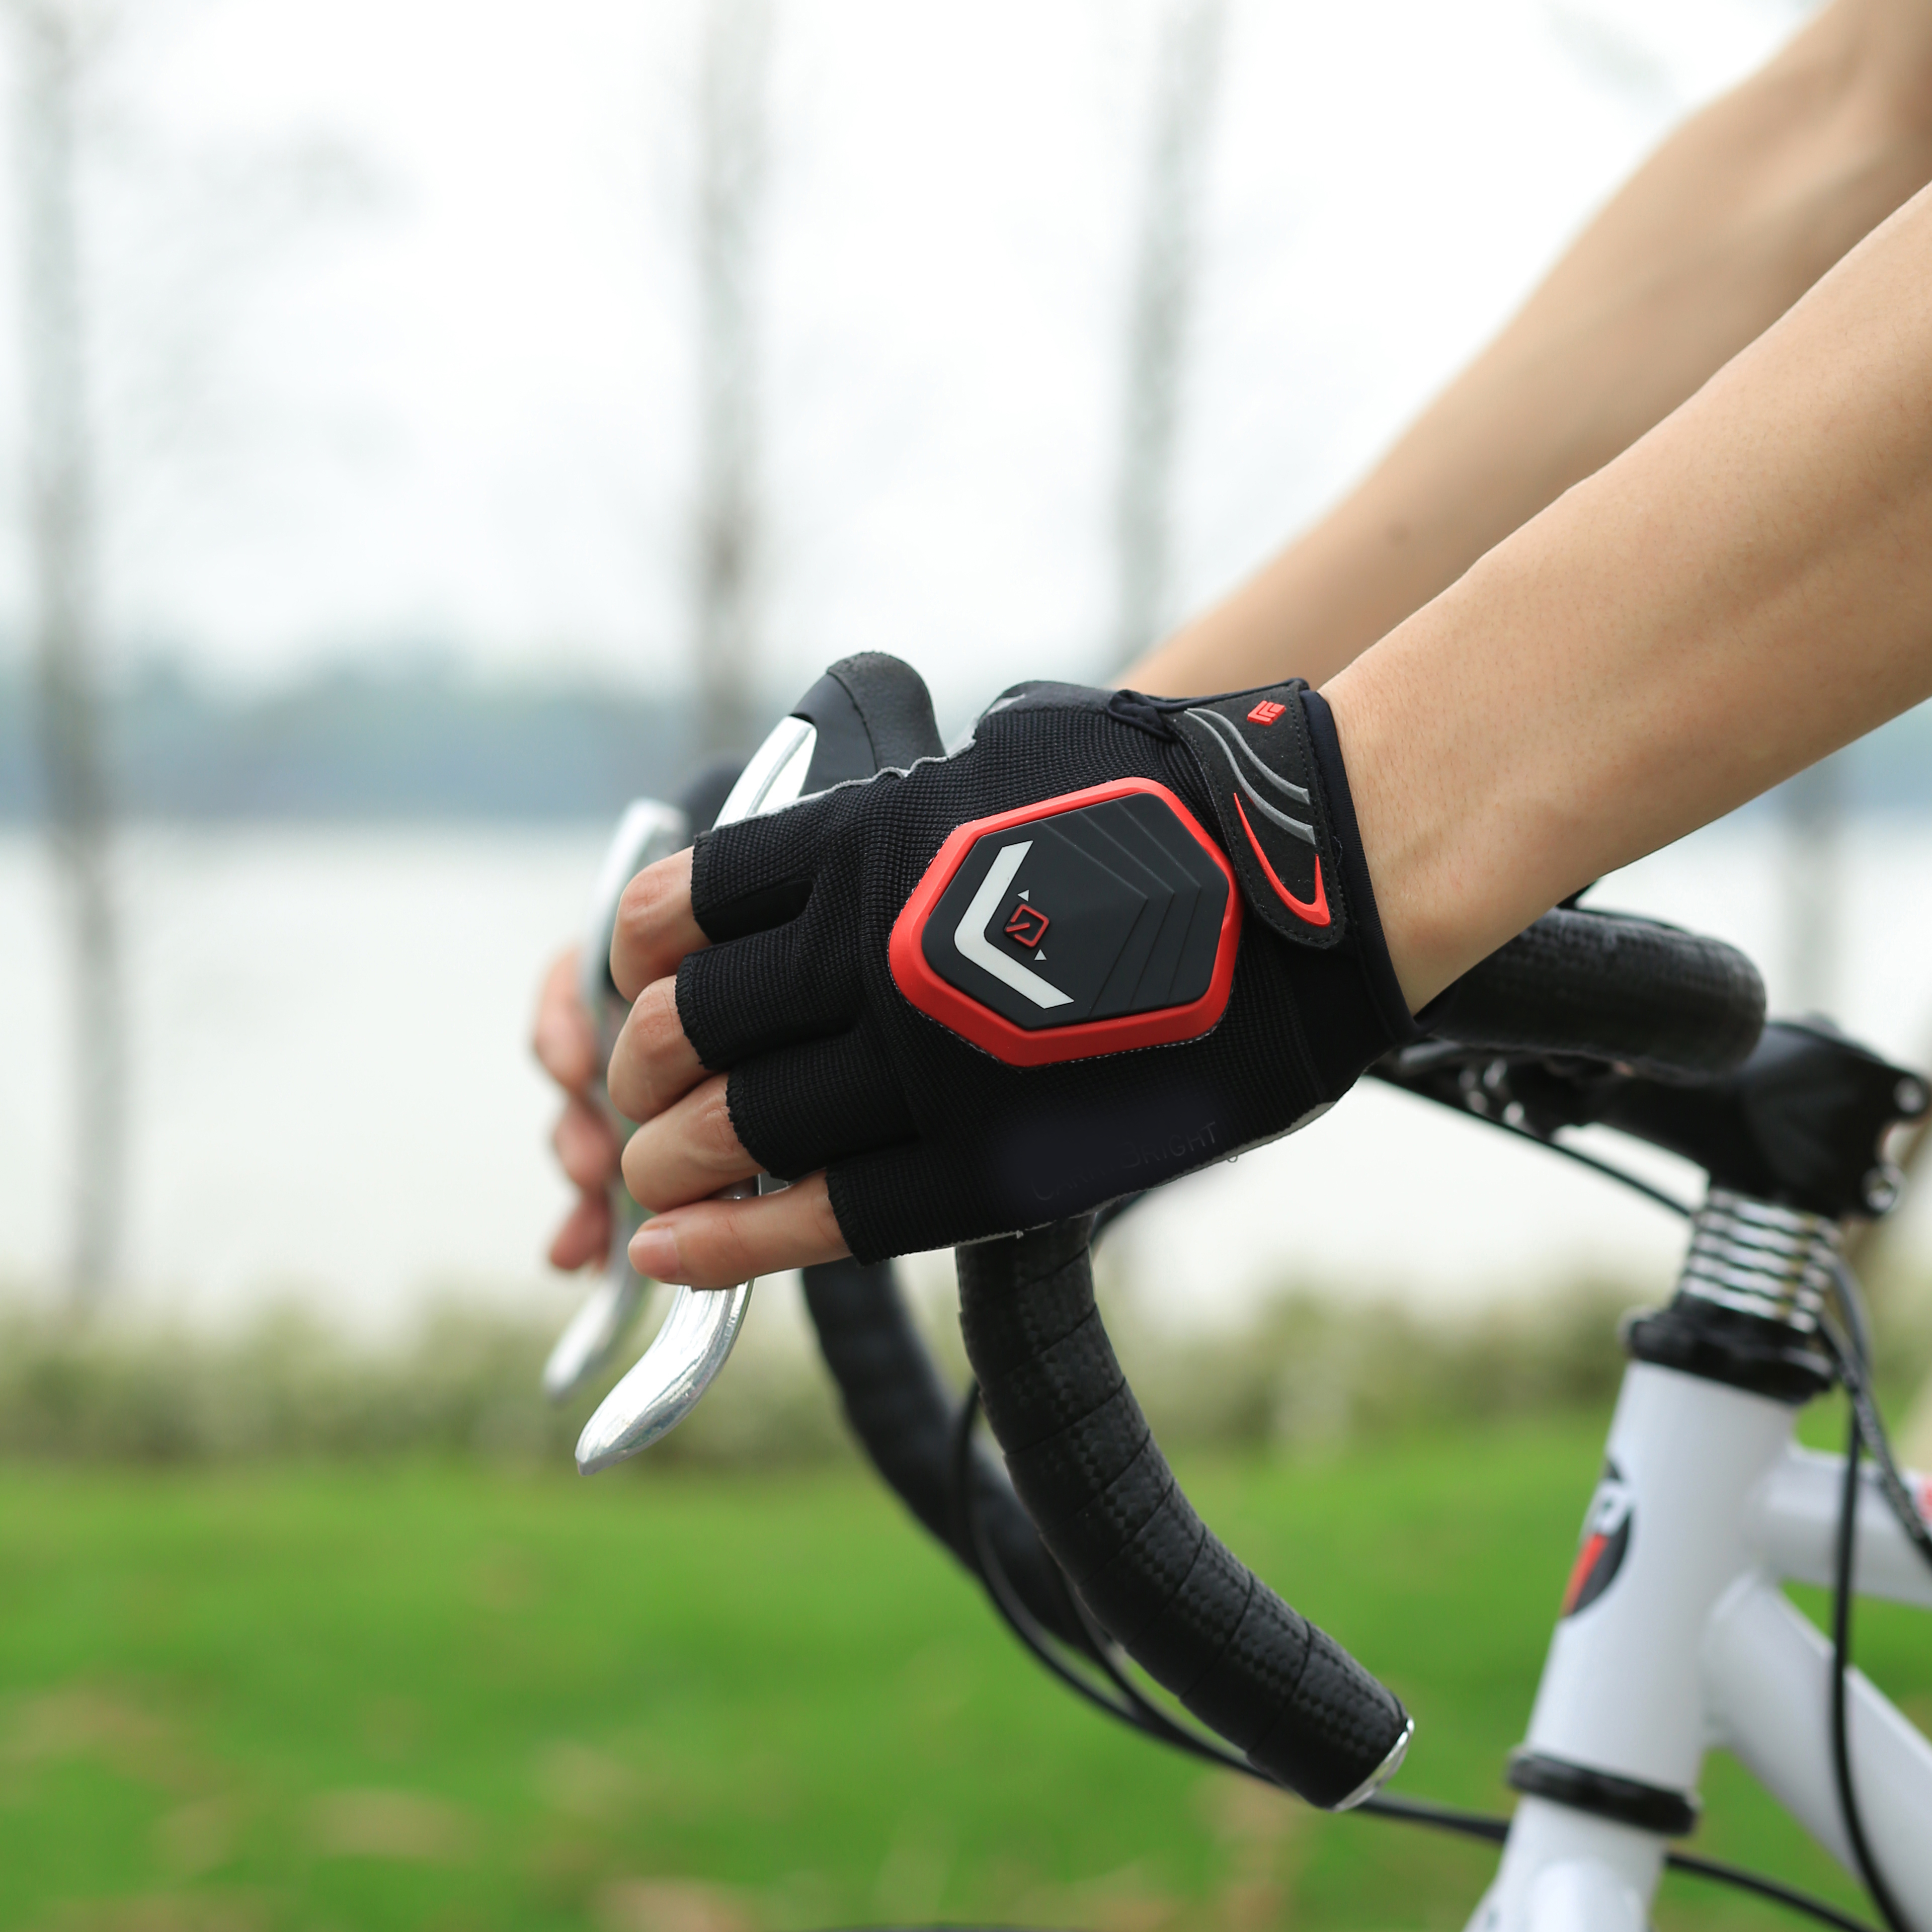 Bicycle Accessories in UK